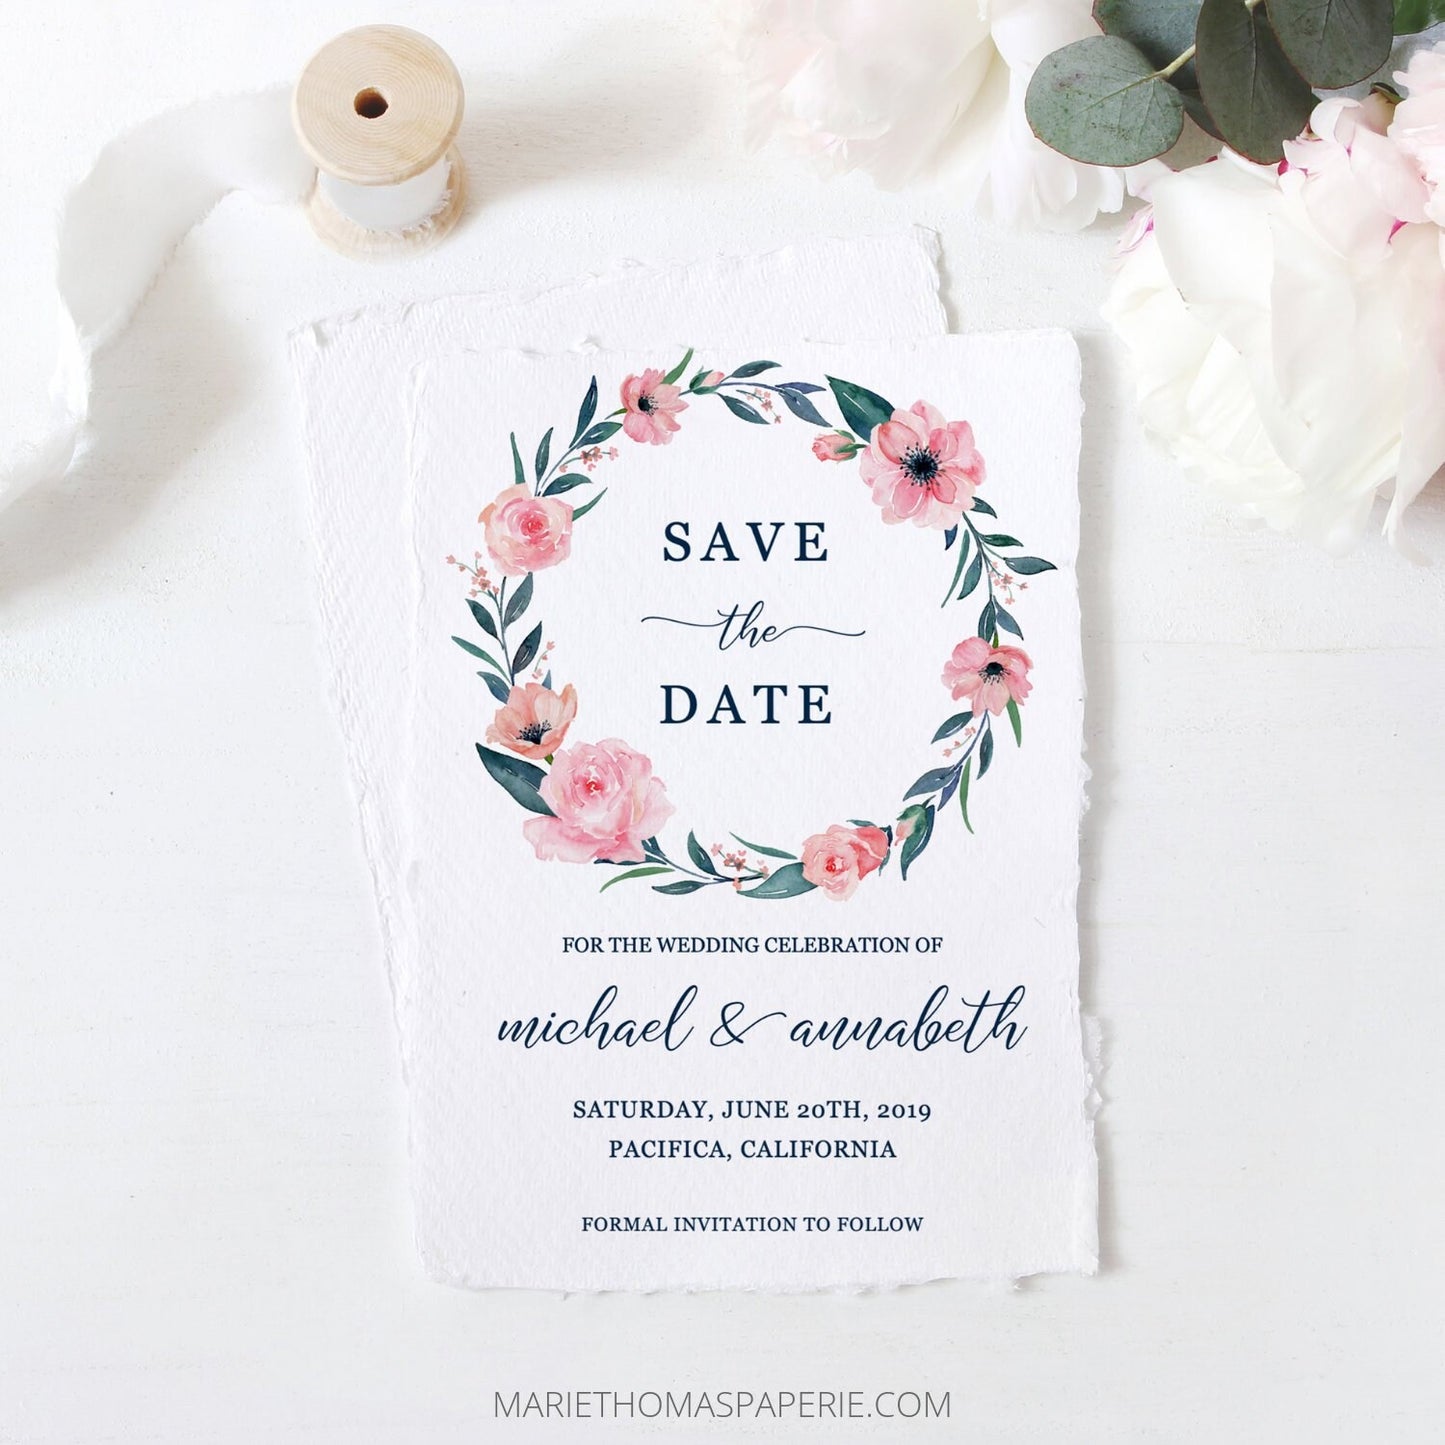 Editable Save the Date Navy & Pink Floral Wreath Save the Date Cards Wedding Announcement Text Template